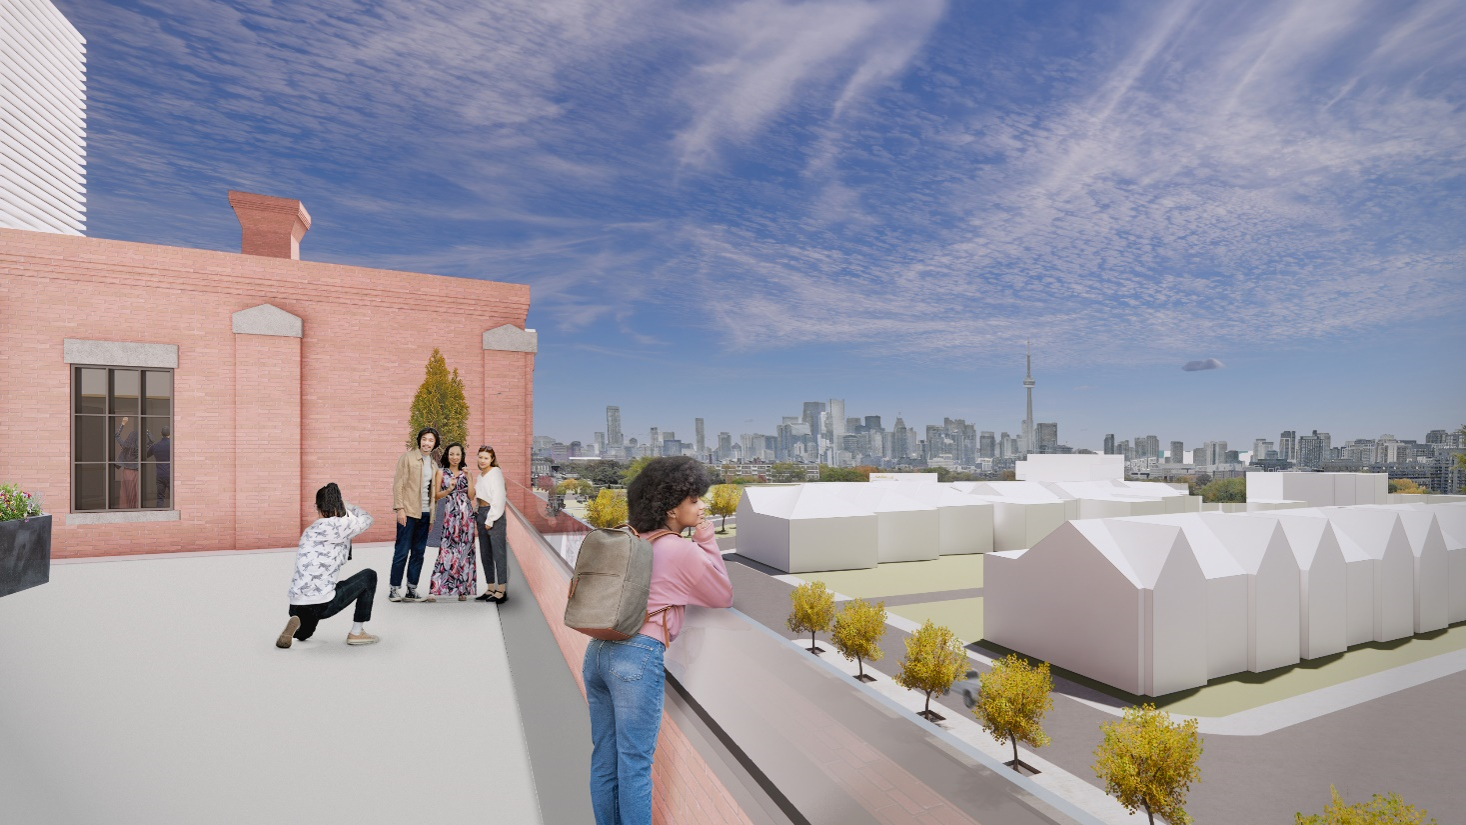 Draft design rendering of the rooftop area on the Linseed Factory, with people taking in the views towards the downtown Toronto skyline.